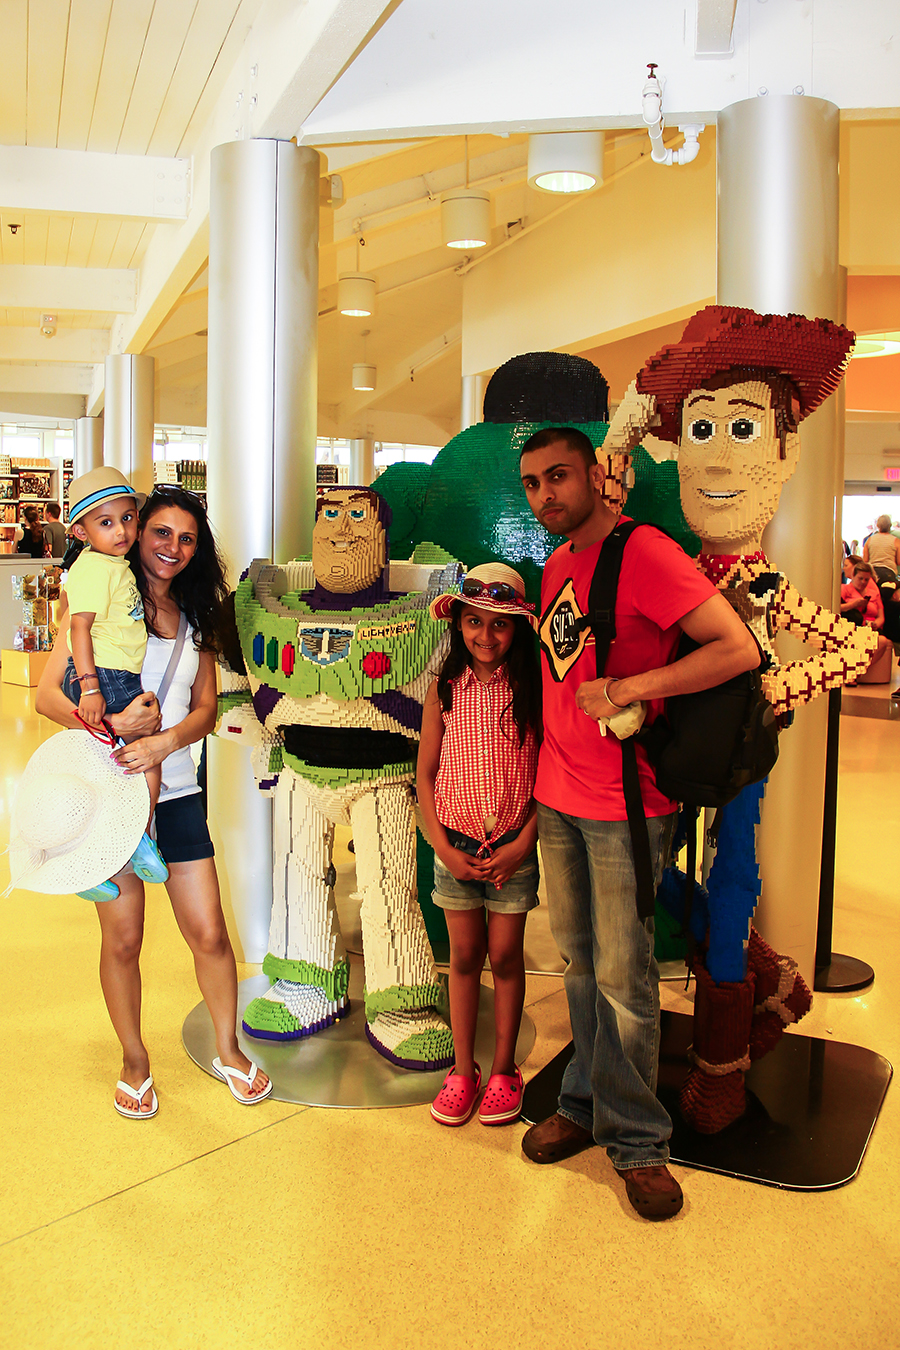 The four of us pose with Lego sculptures of Buzz and Woody in Orlando, Florida